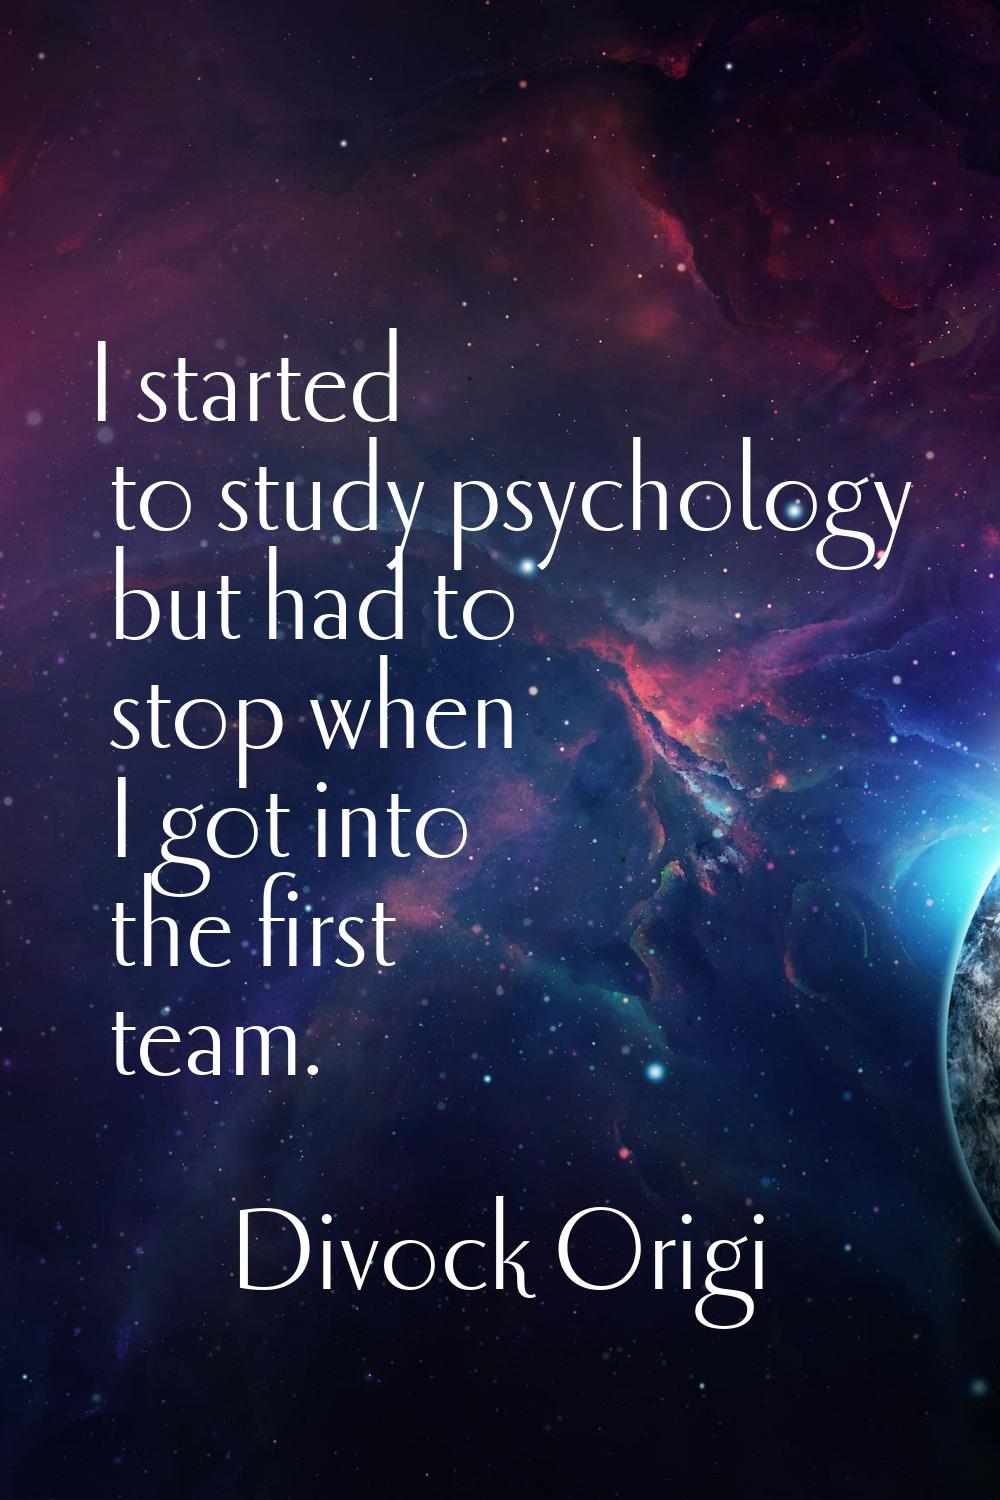 I started to study psychology but had to stop when I got into the first team.